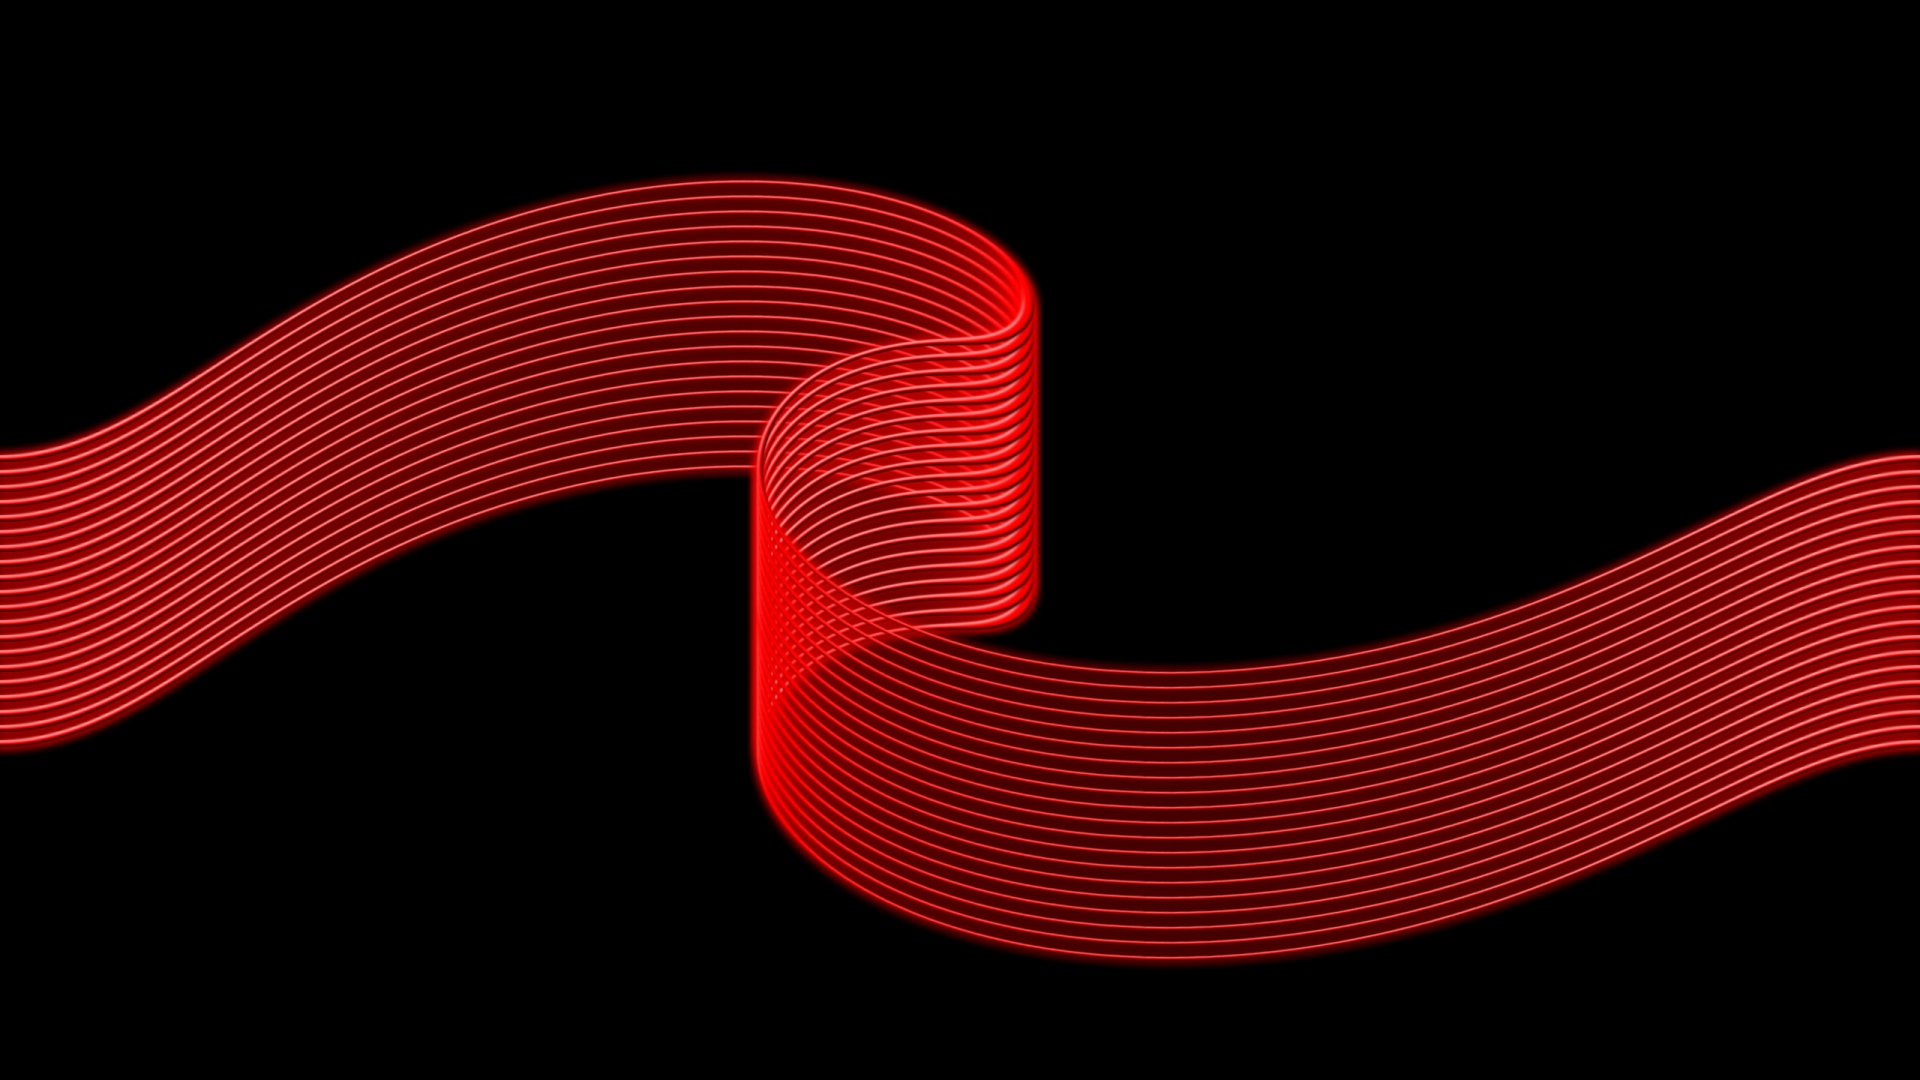 Download Hd Wallpepr Curve Line Red - Background Hd Red And Black , HD Wallpaper & Backgrounds